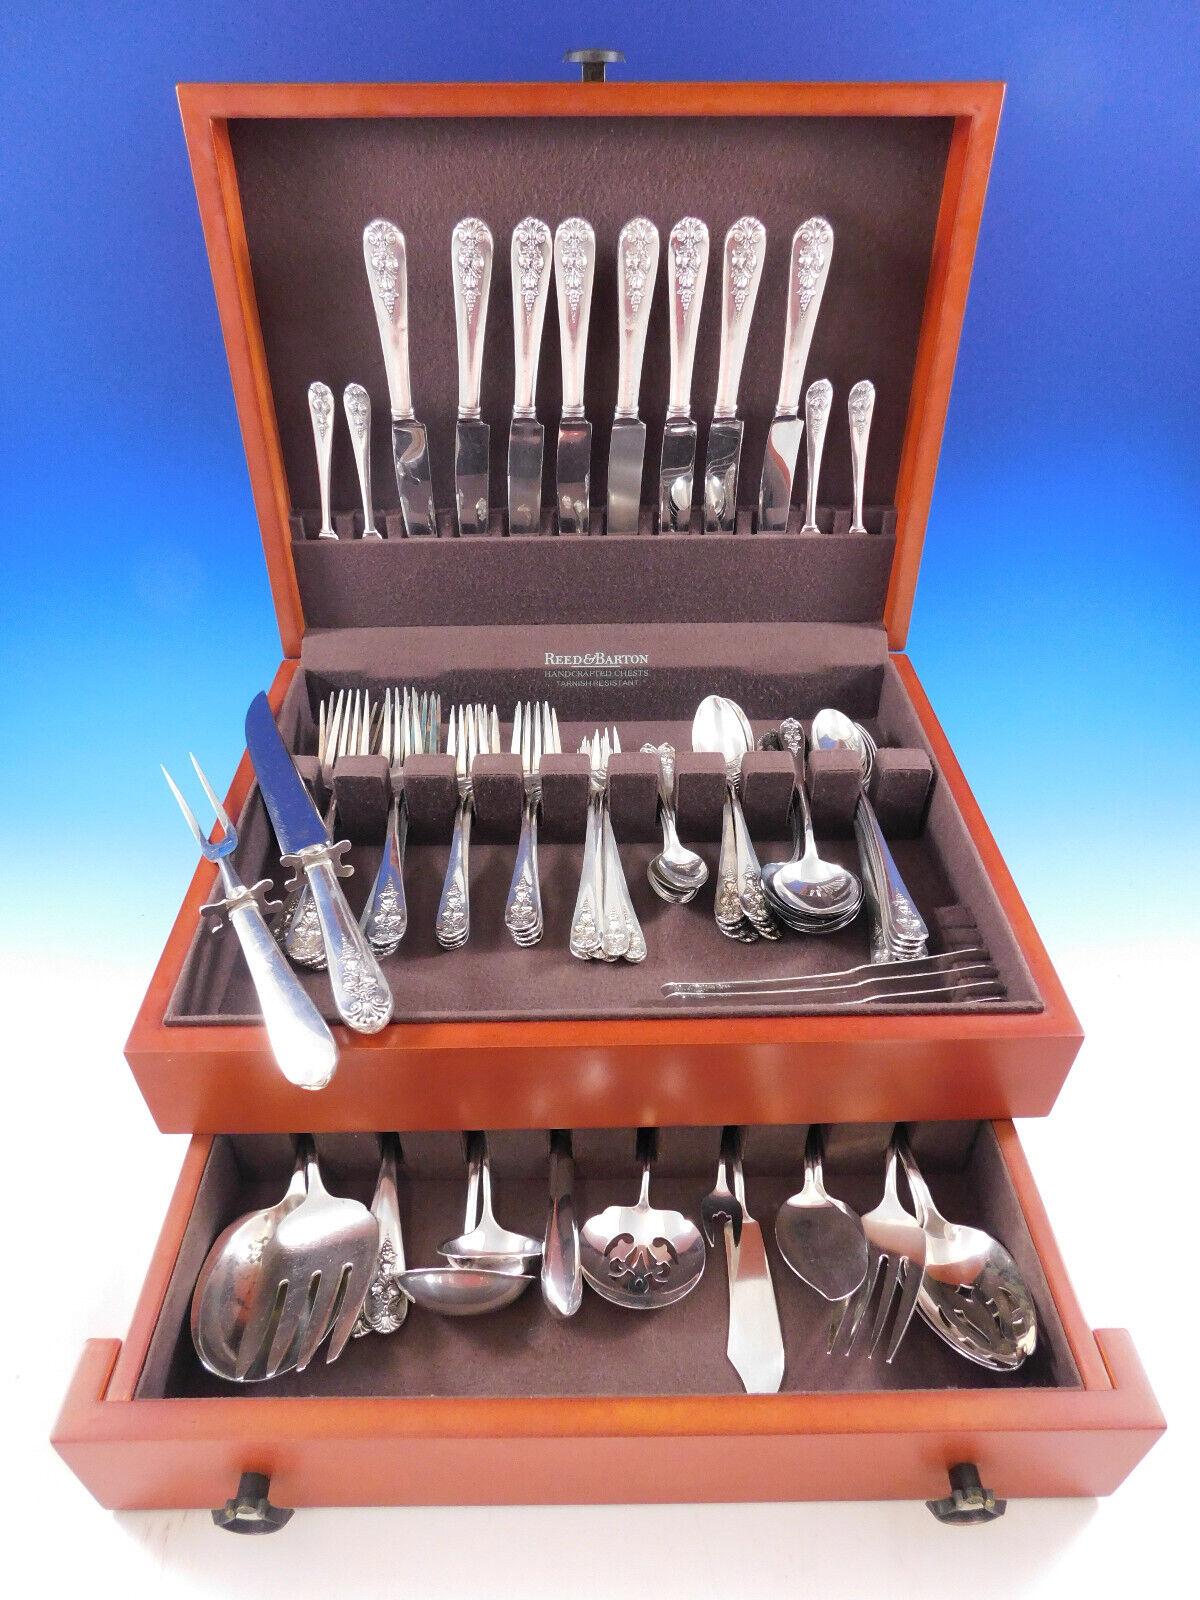 Rare Pendant of Fruit by Lunt, c1939, sterling silver Flatware set with gorgeous high-relief hanging fruit design, 89 pieces. This set includes:

8 Knives, 9